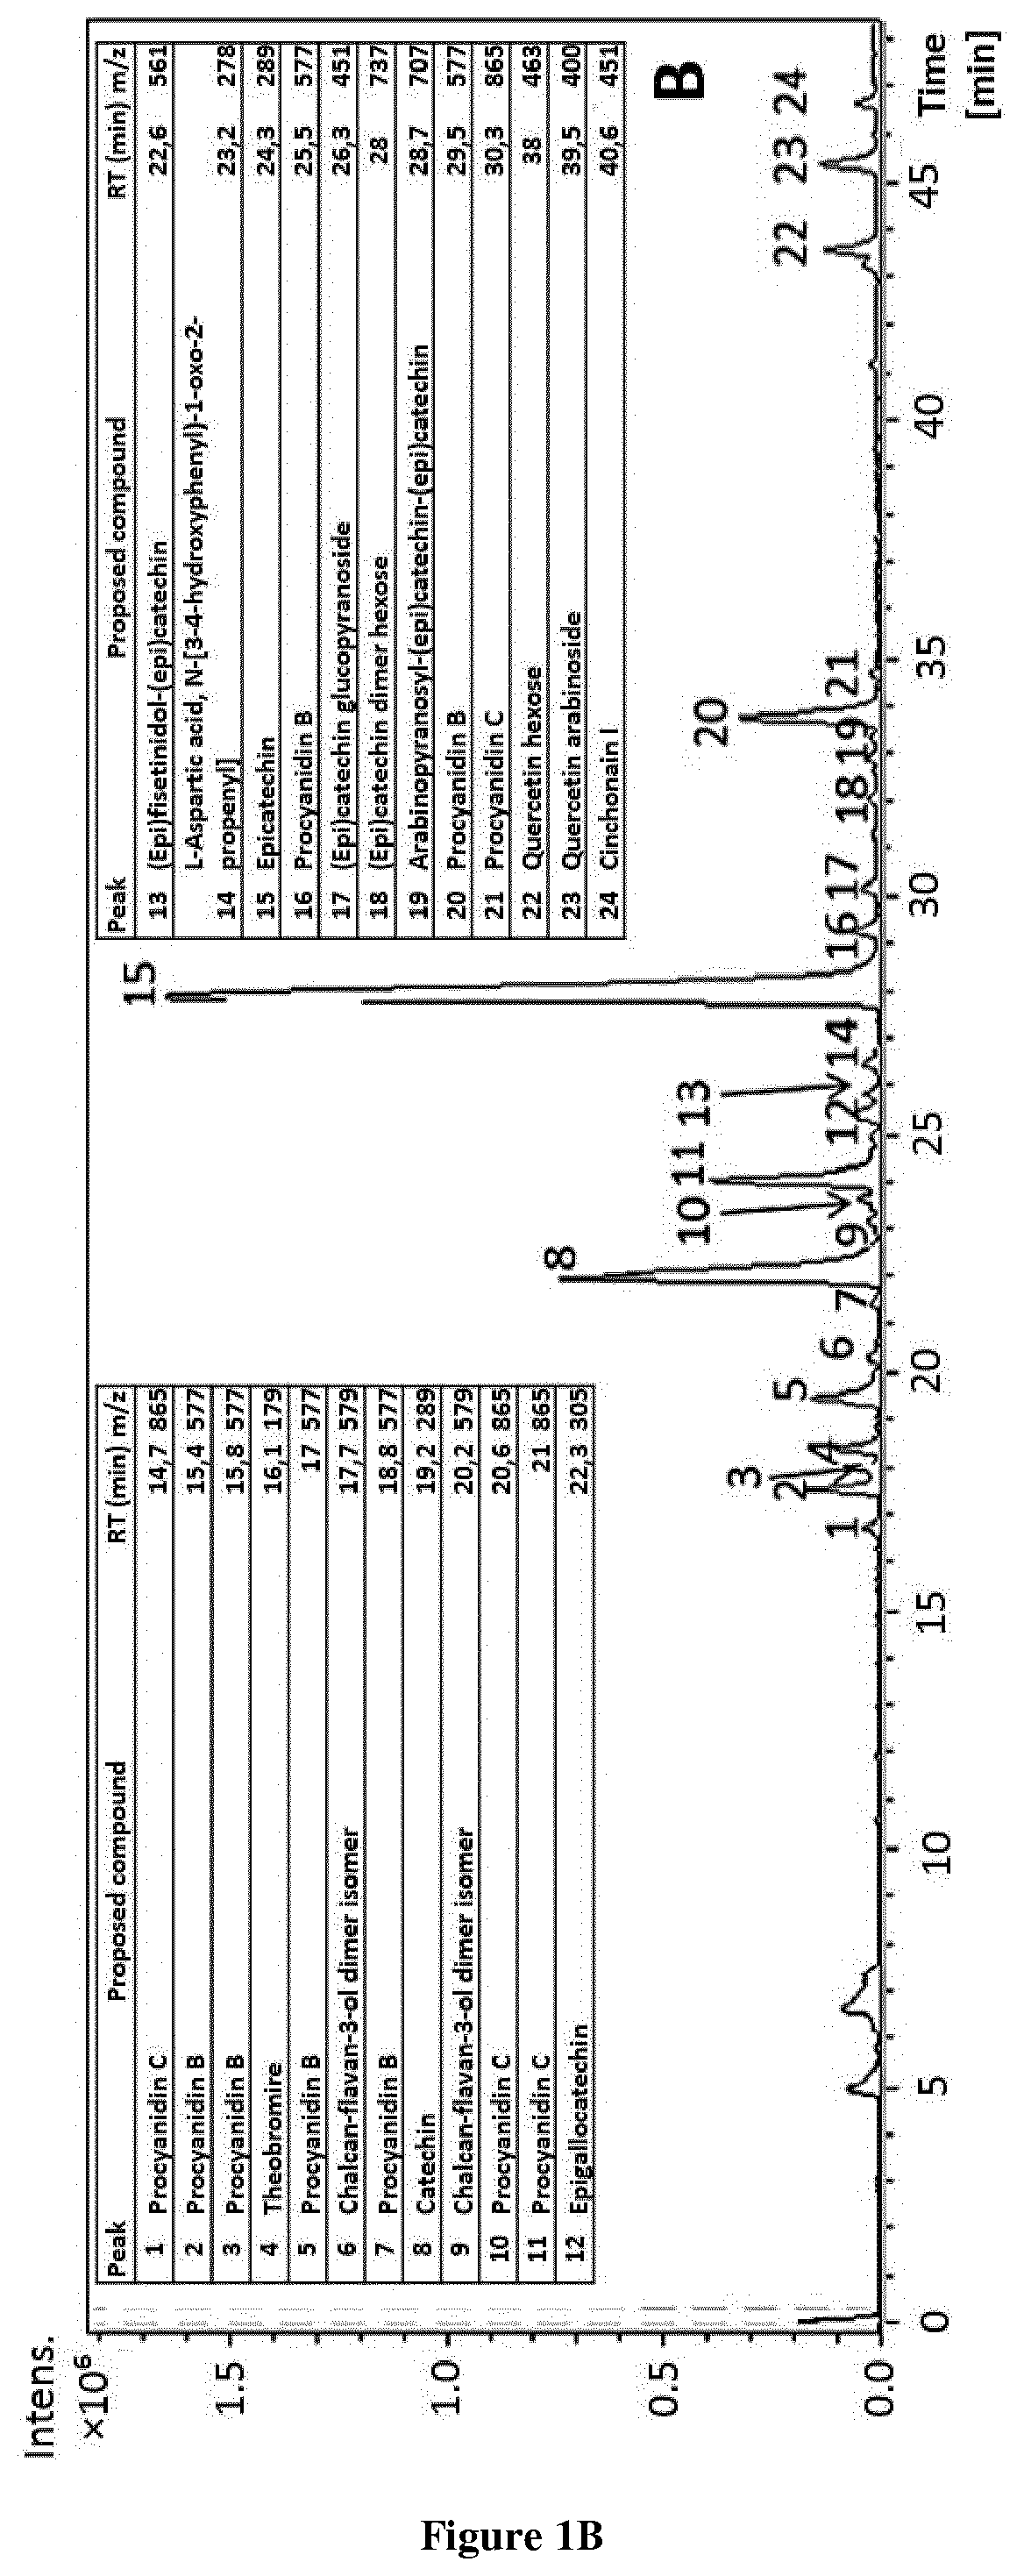 Methods and pharmaceutical compositions for the treatment of fgfr3-related chondrodysplasias